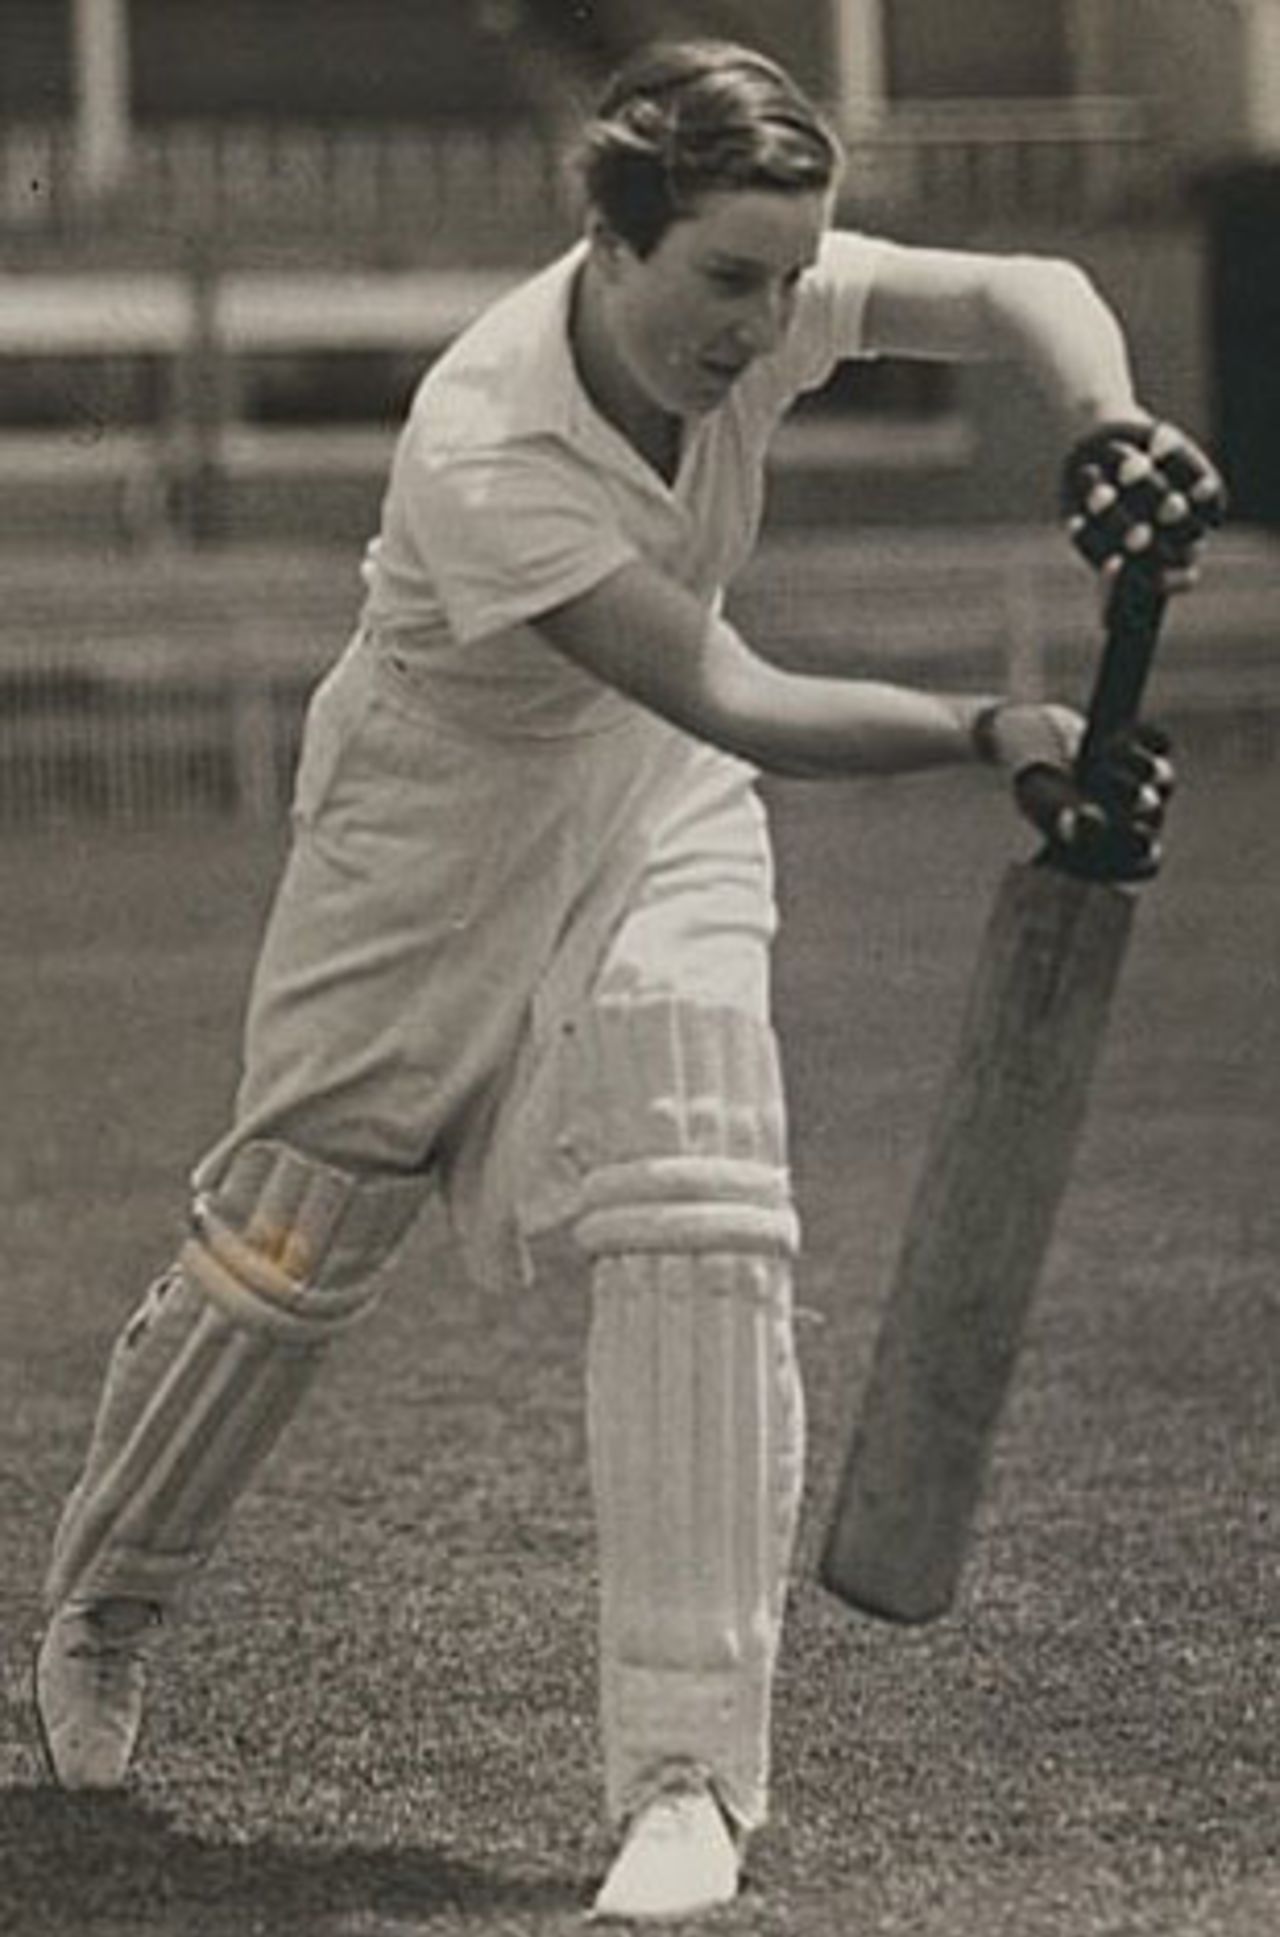 Joy Liebert during England's tour of Australia and New Zealand in 1934-35